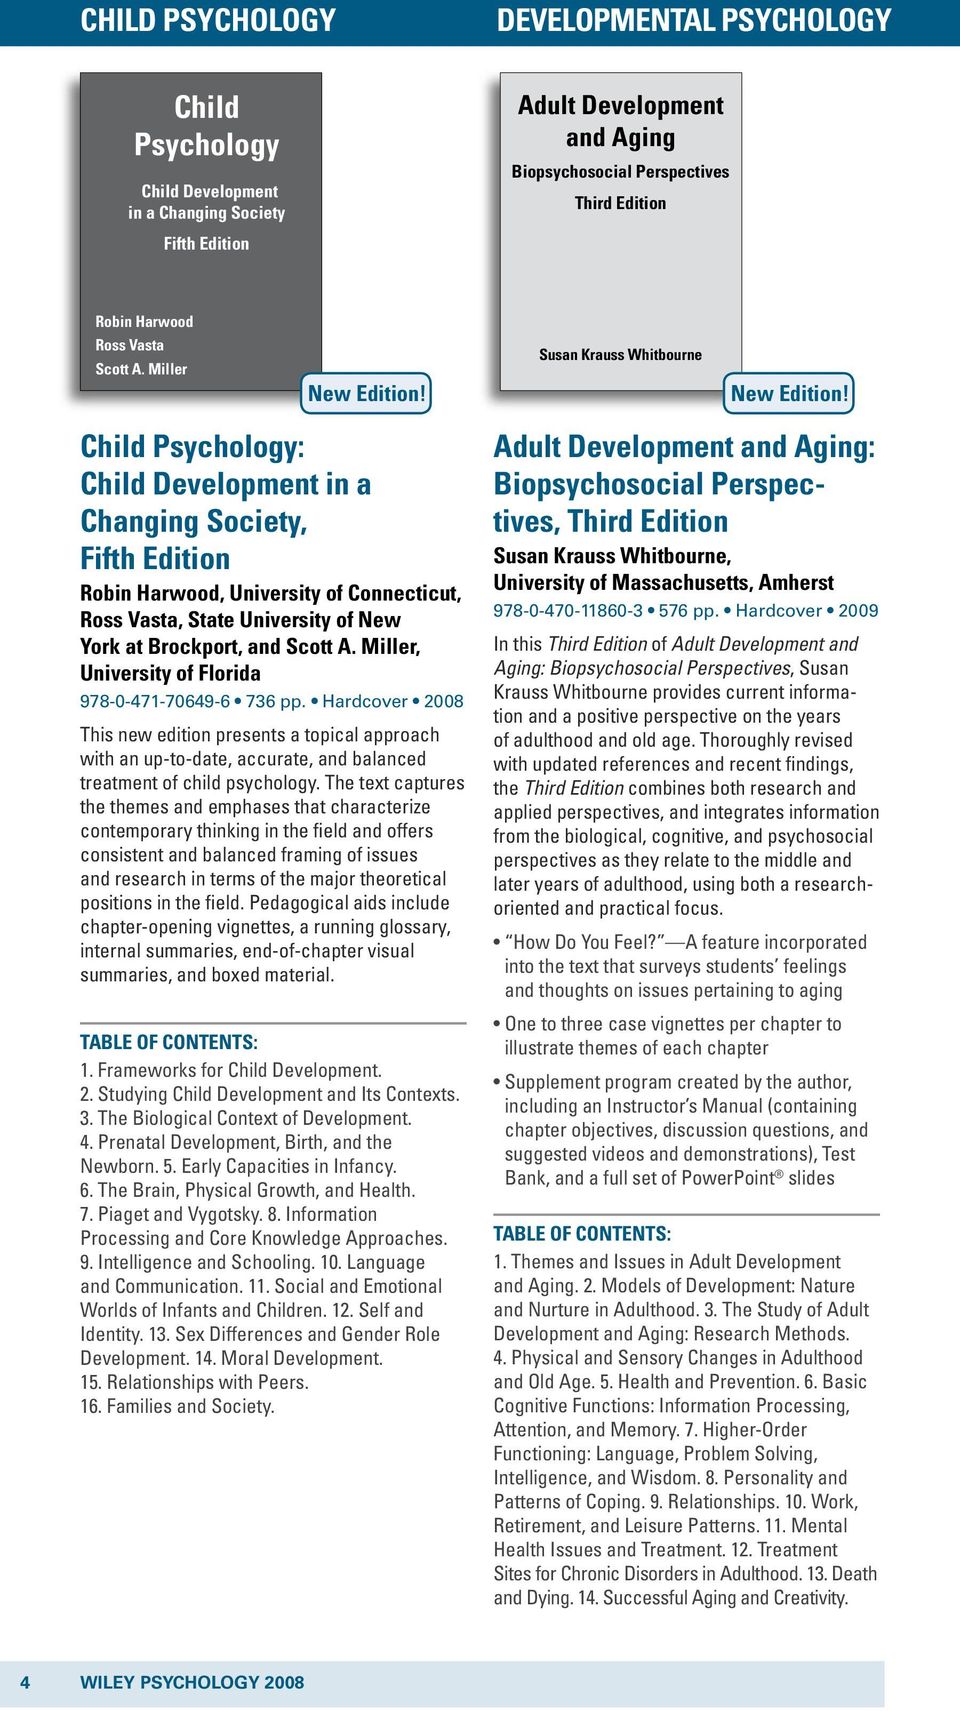 Child Psychology: Child Development in a Changing Society, Fifth Edition Robin Harwood, University of Connecticut, Ross Vasta, State University of New York at Brockport, and Scott A.